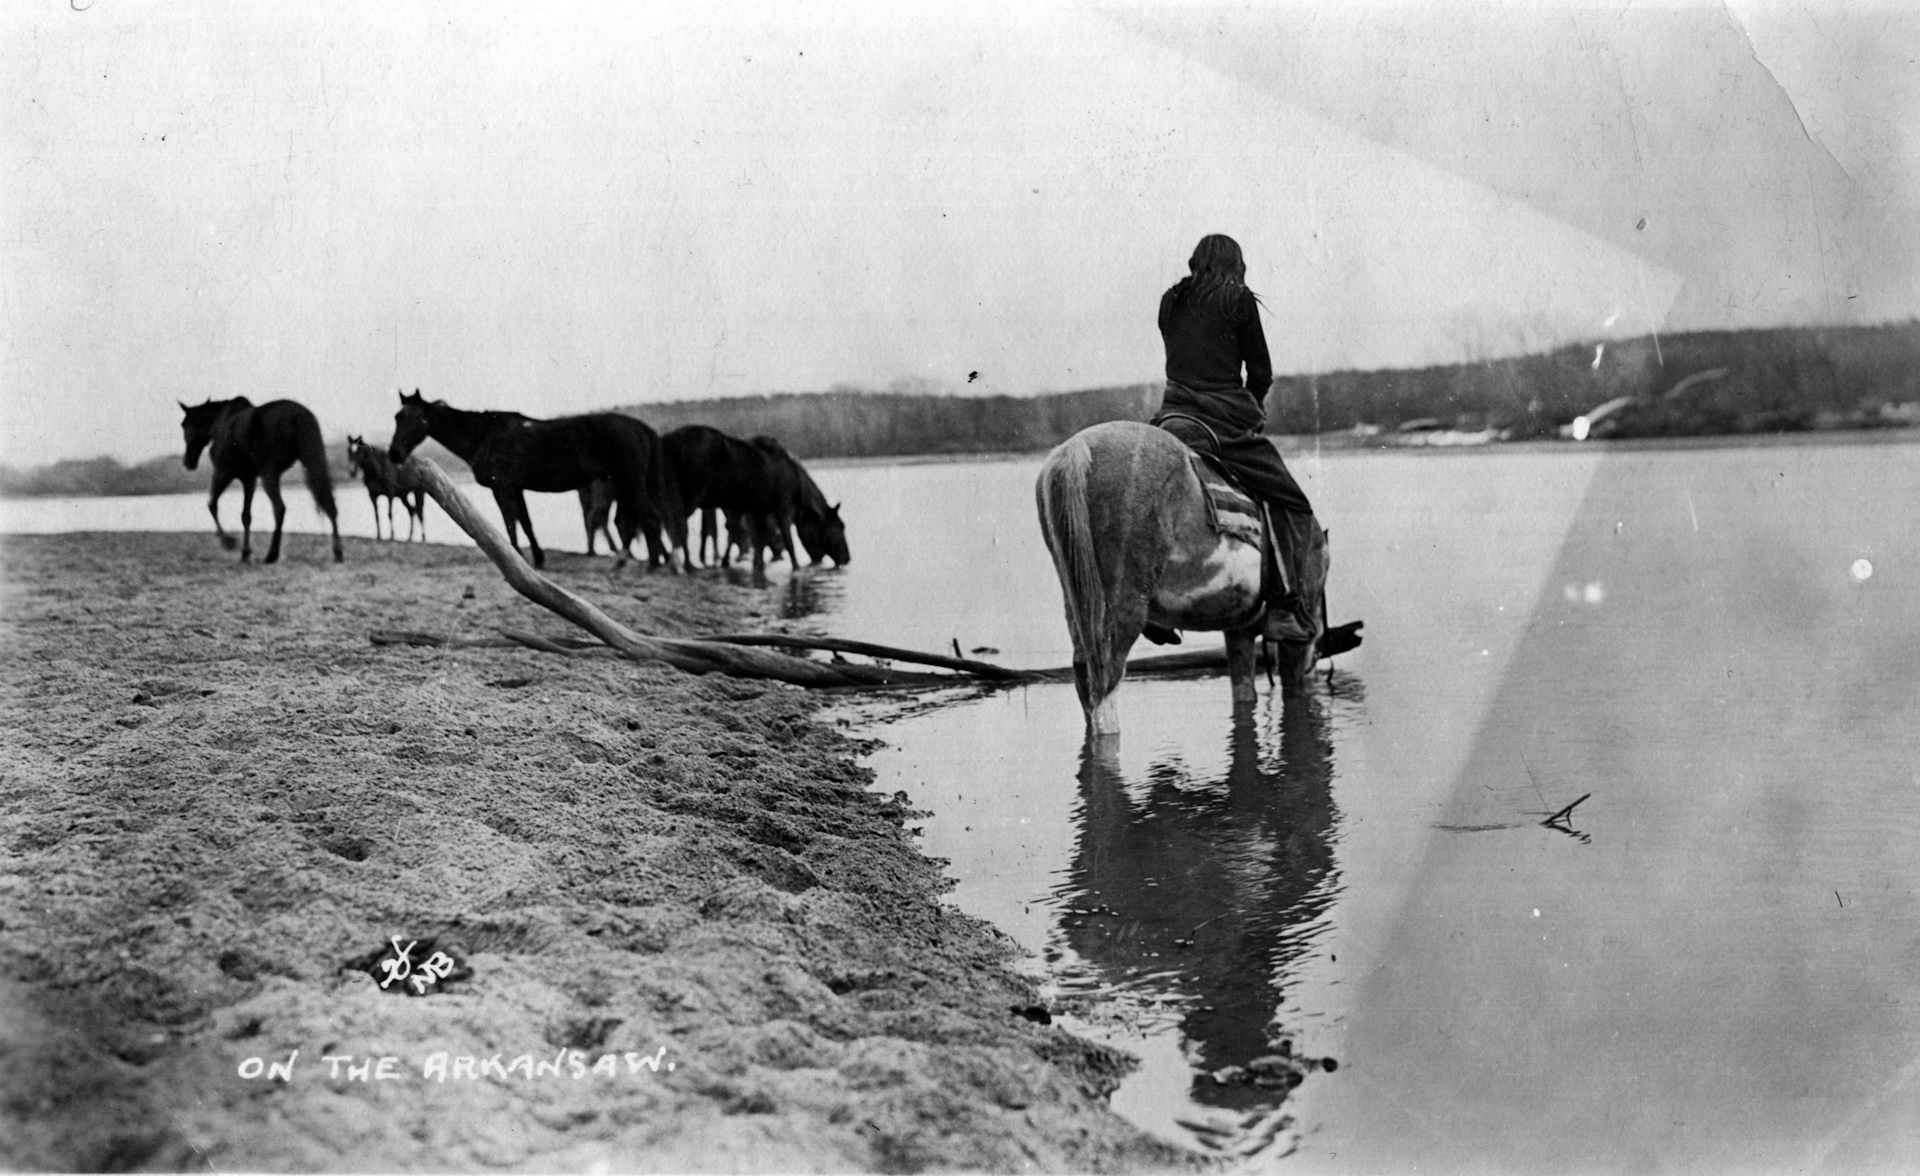 An Osage man on the Arkansas River sometime between 1910 and 1918 – about a decade before the Osage Reign of Terror